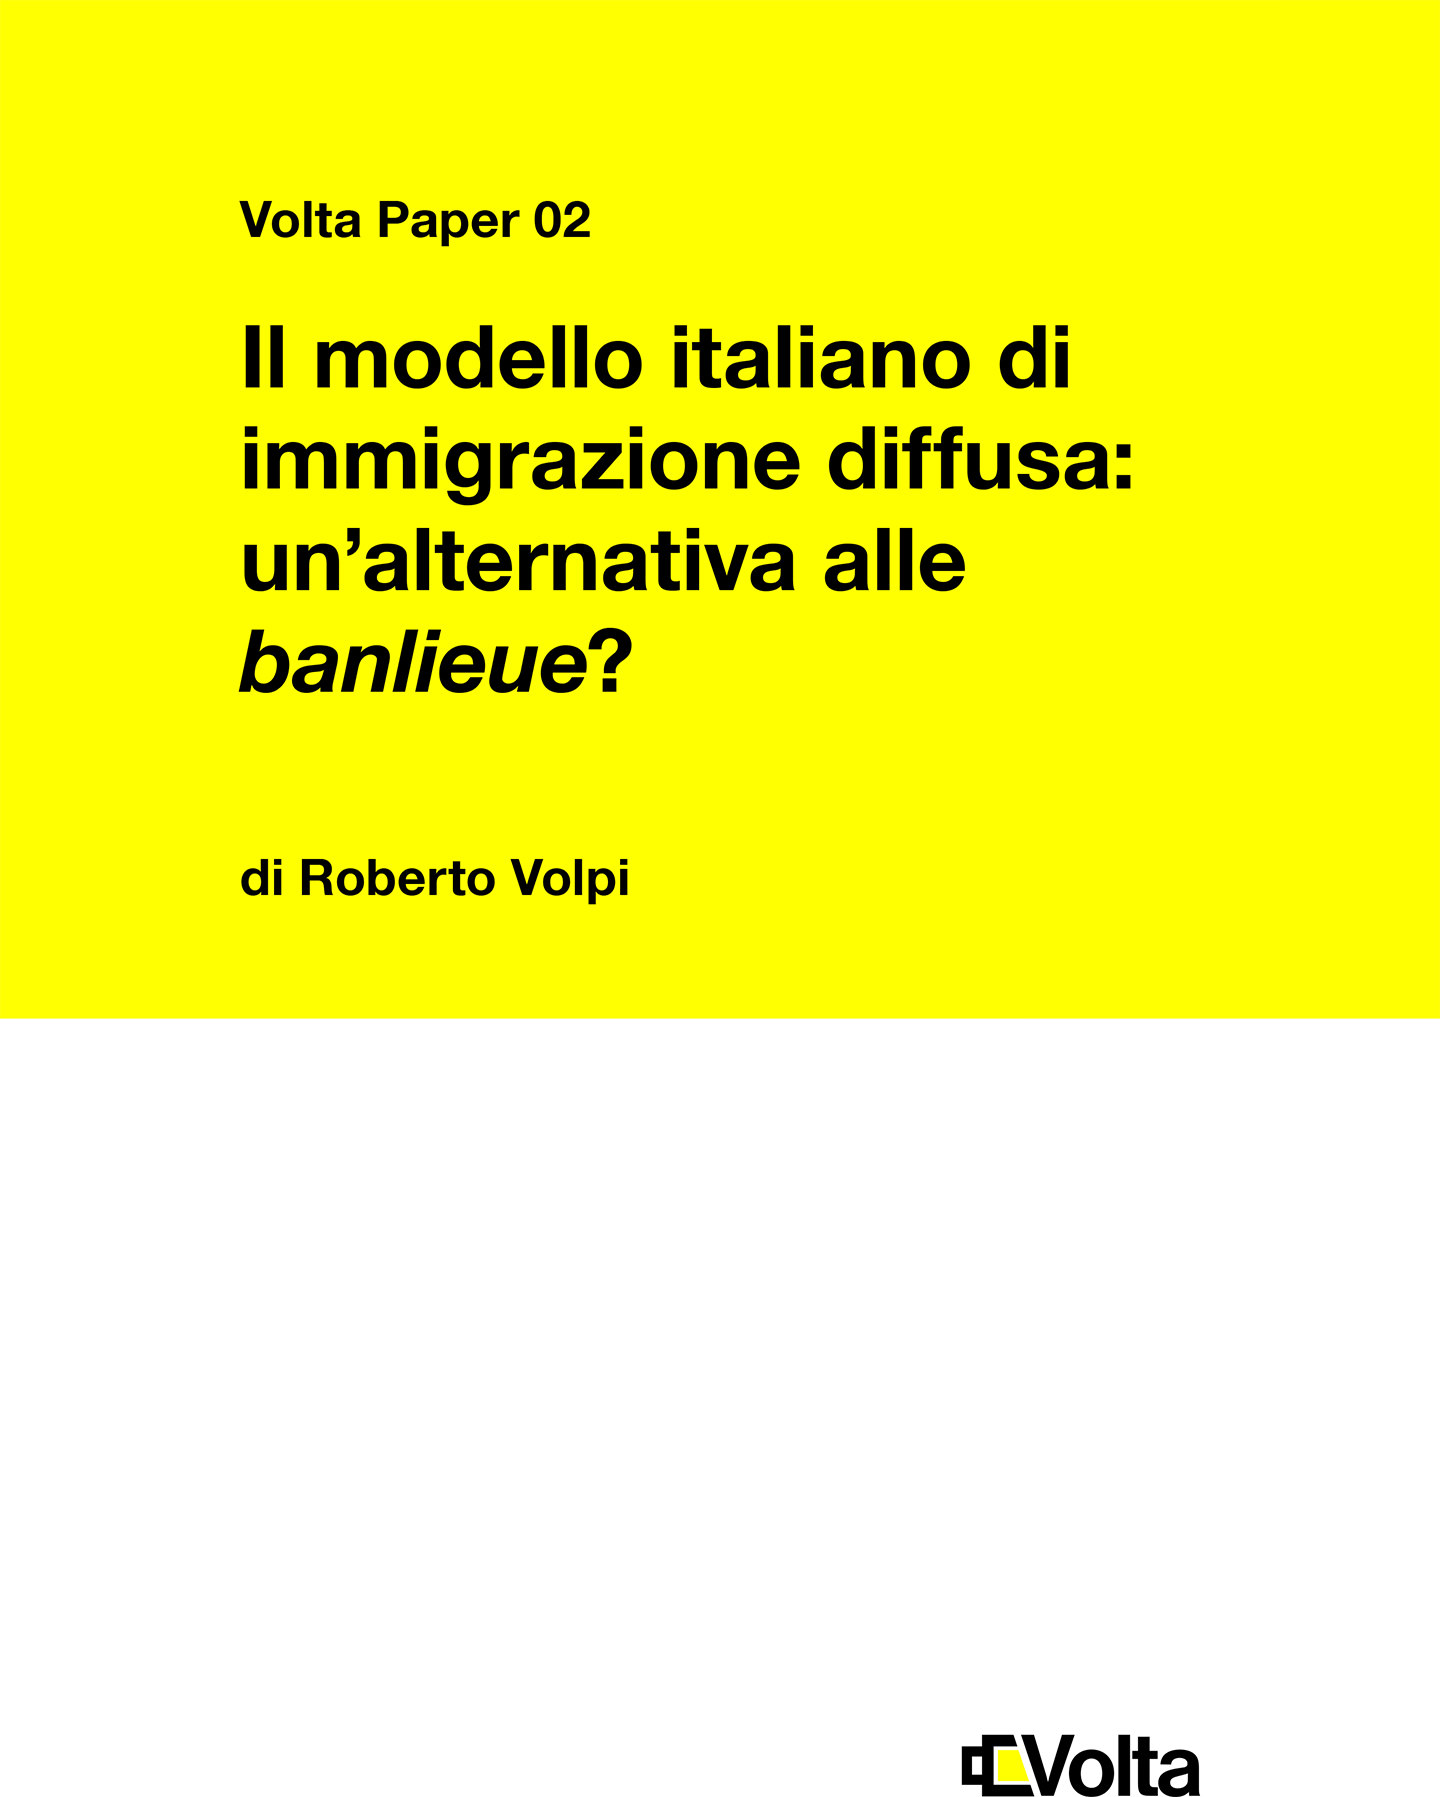 The Italian model of immigration